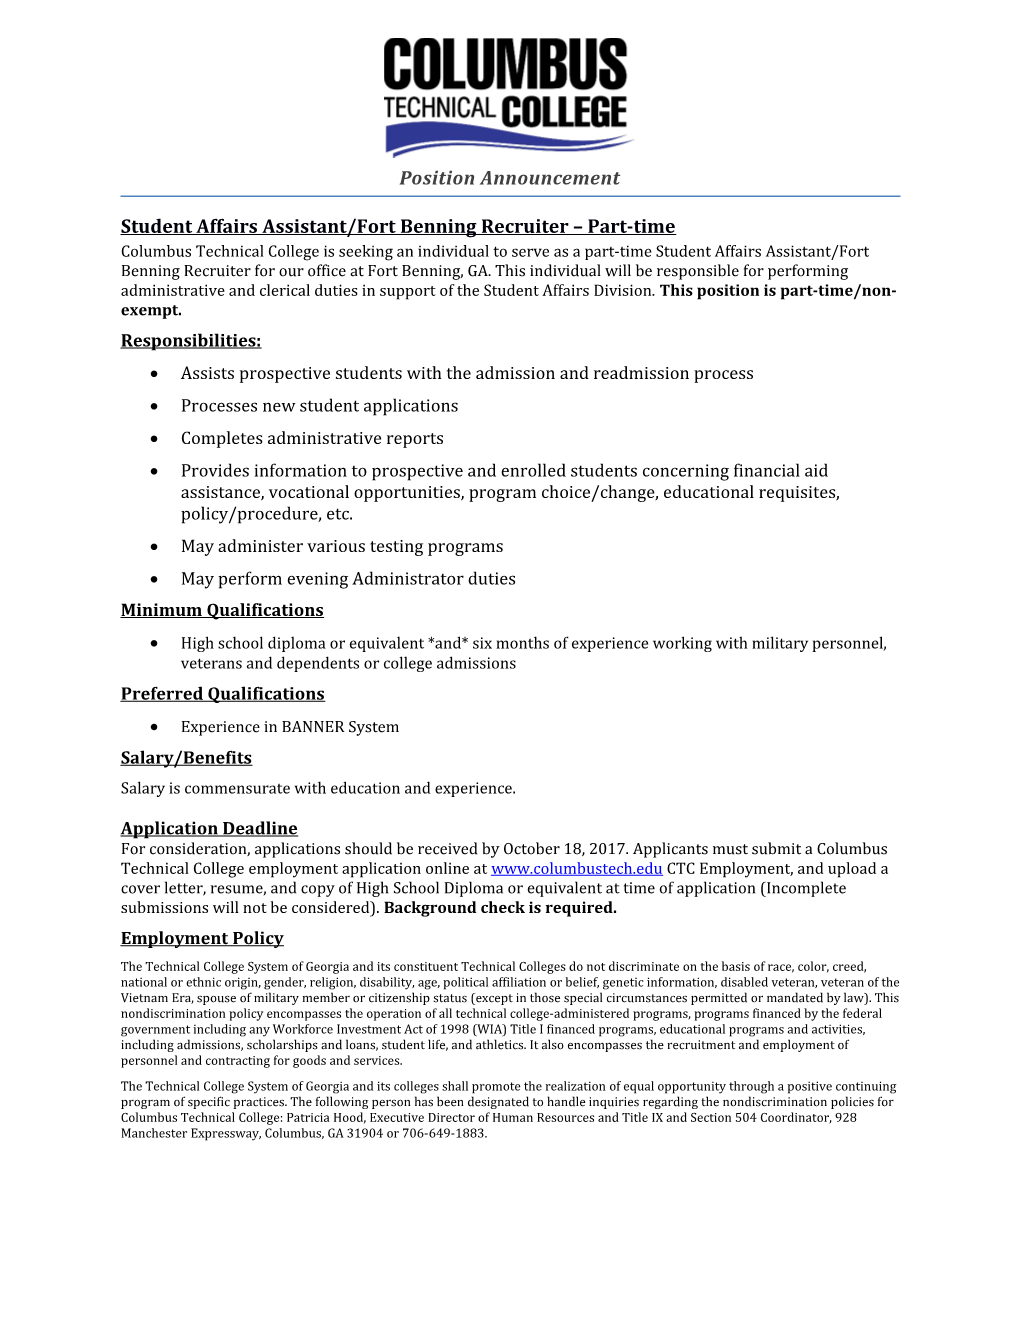 Student Affairs Assistant/Fort Benning Recruiter Part-Time